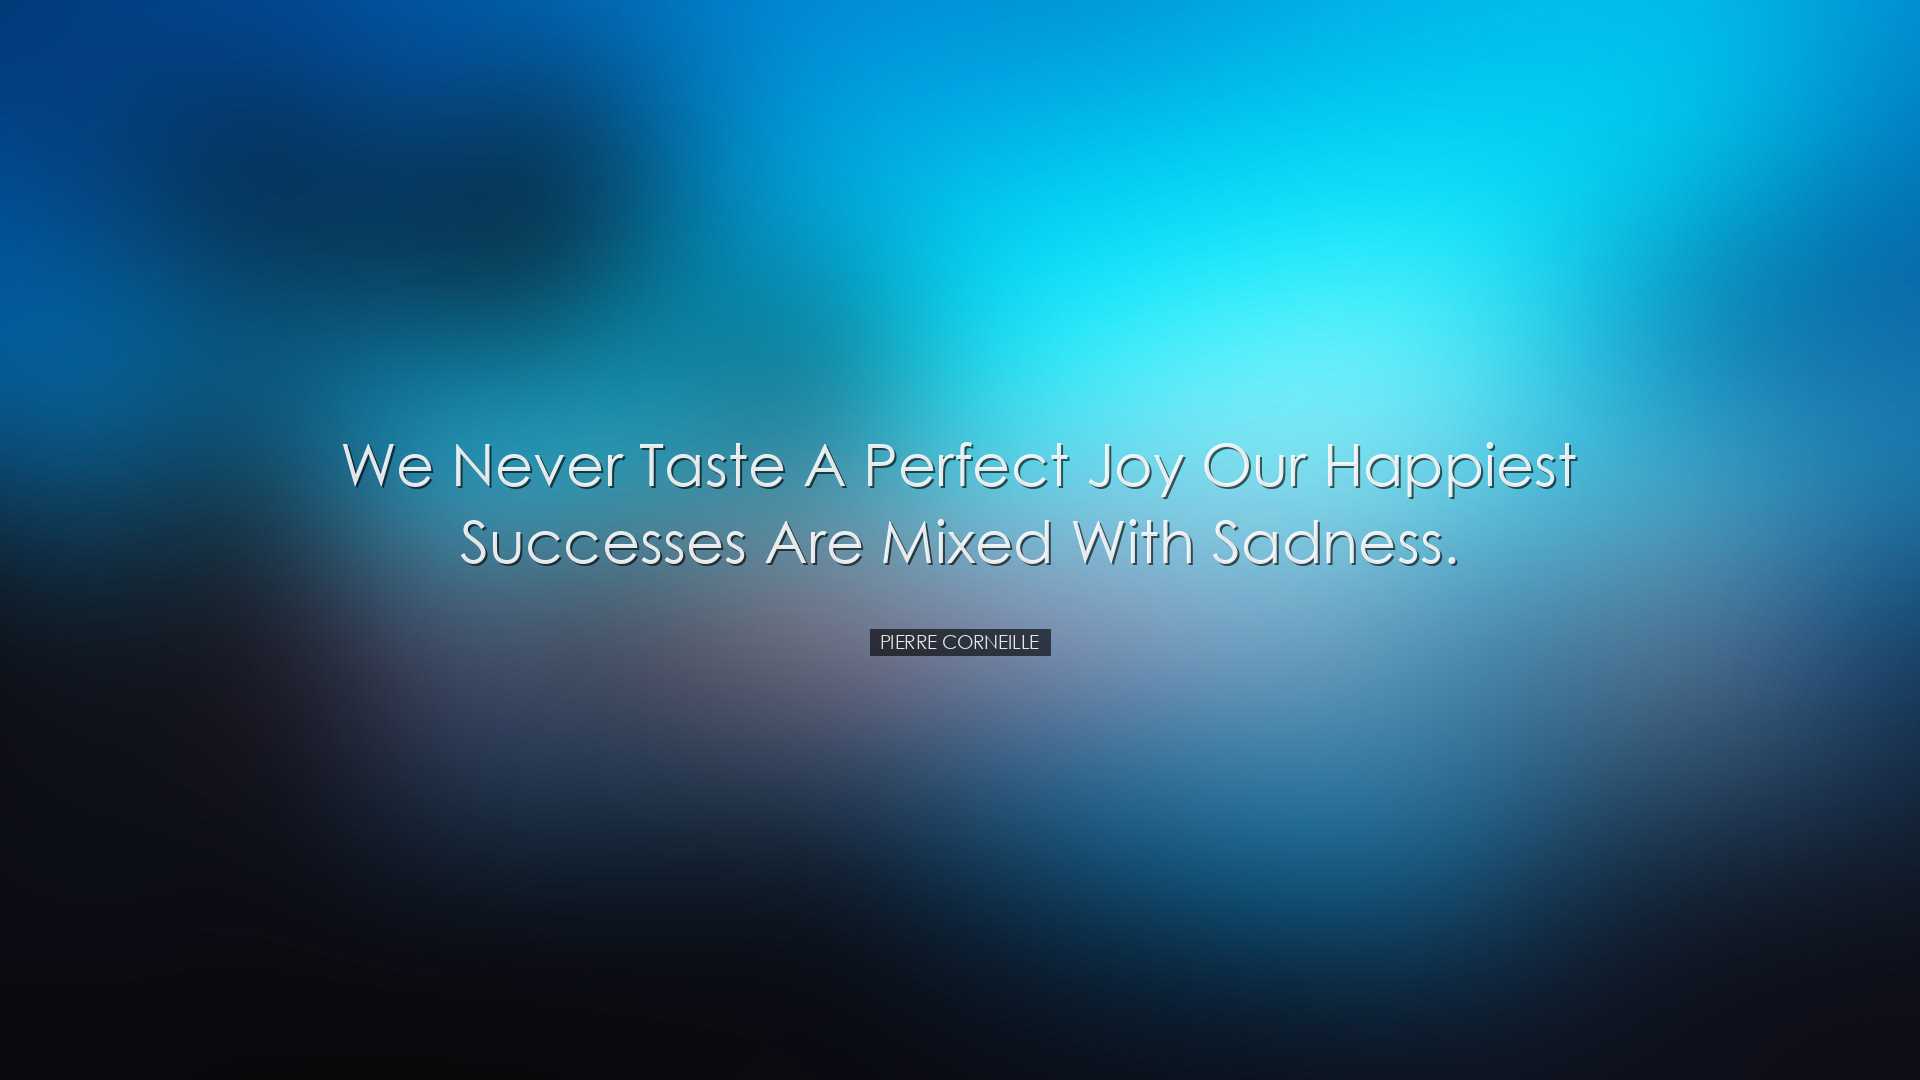 We never taste a perfect joy our happiest successes are mixed with